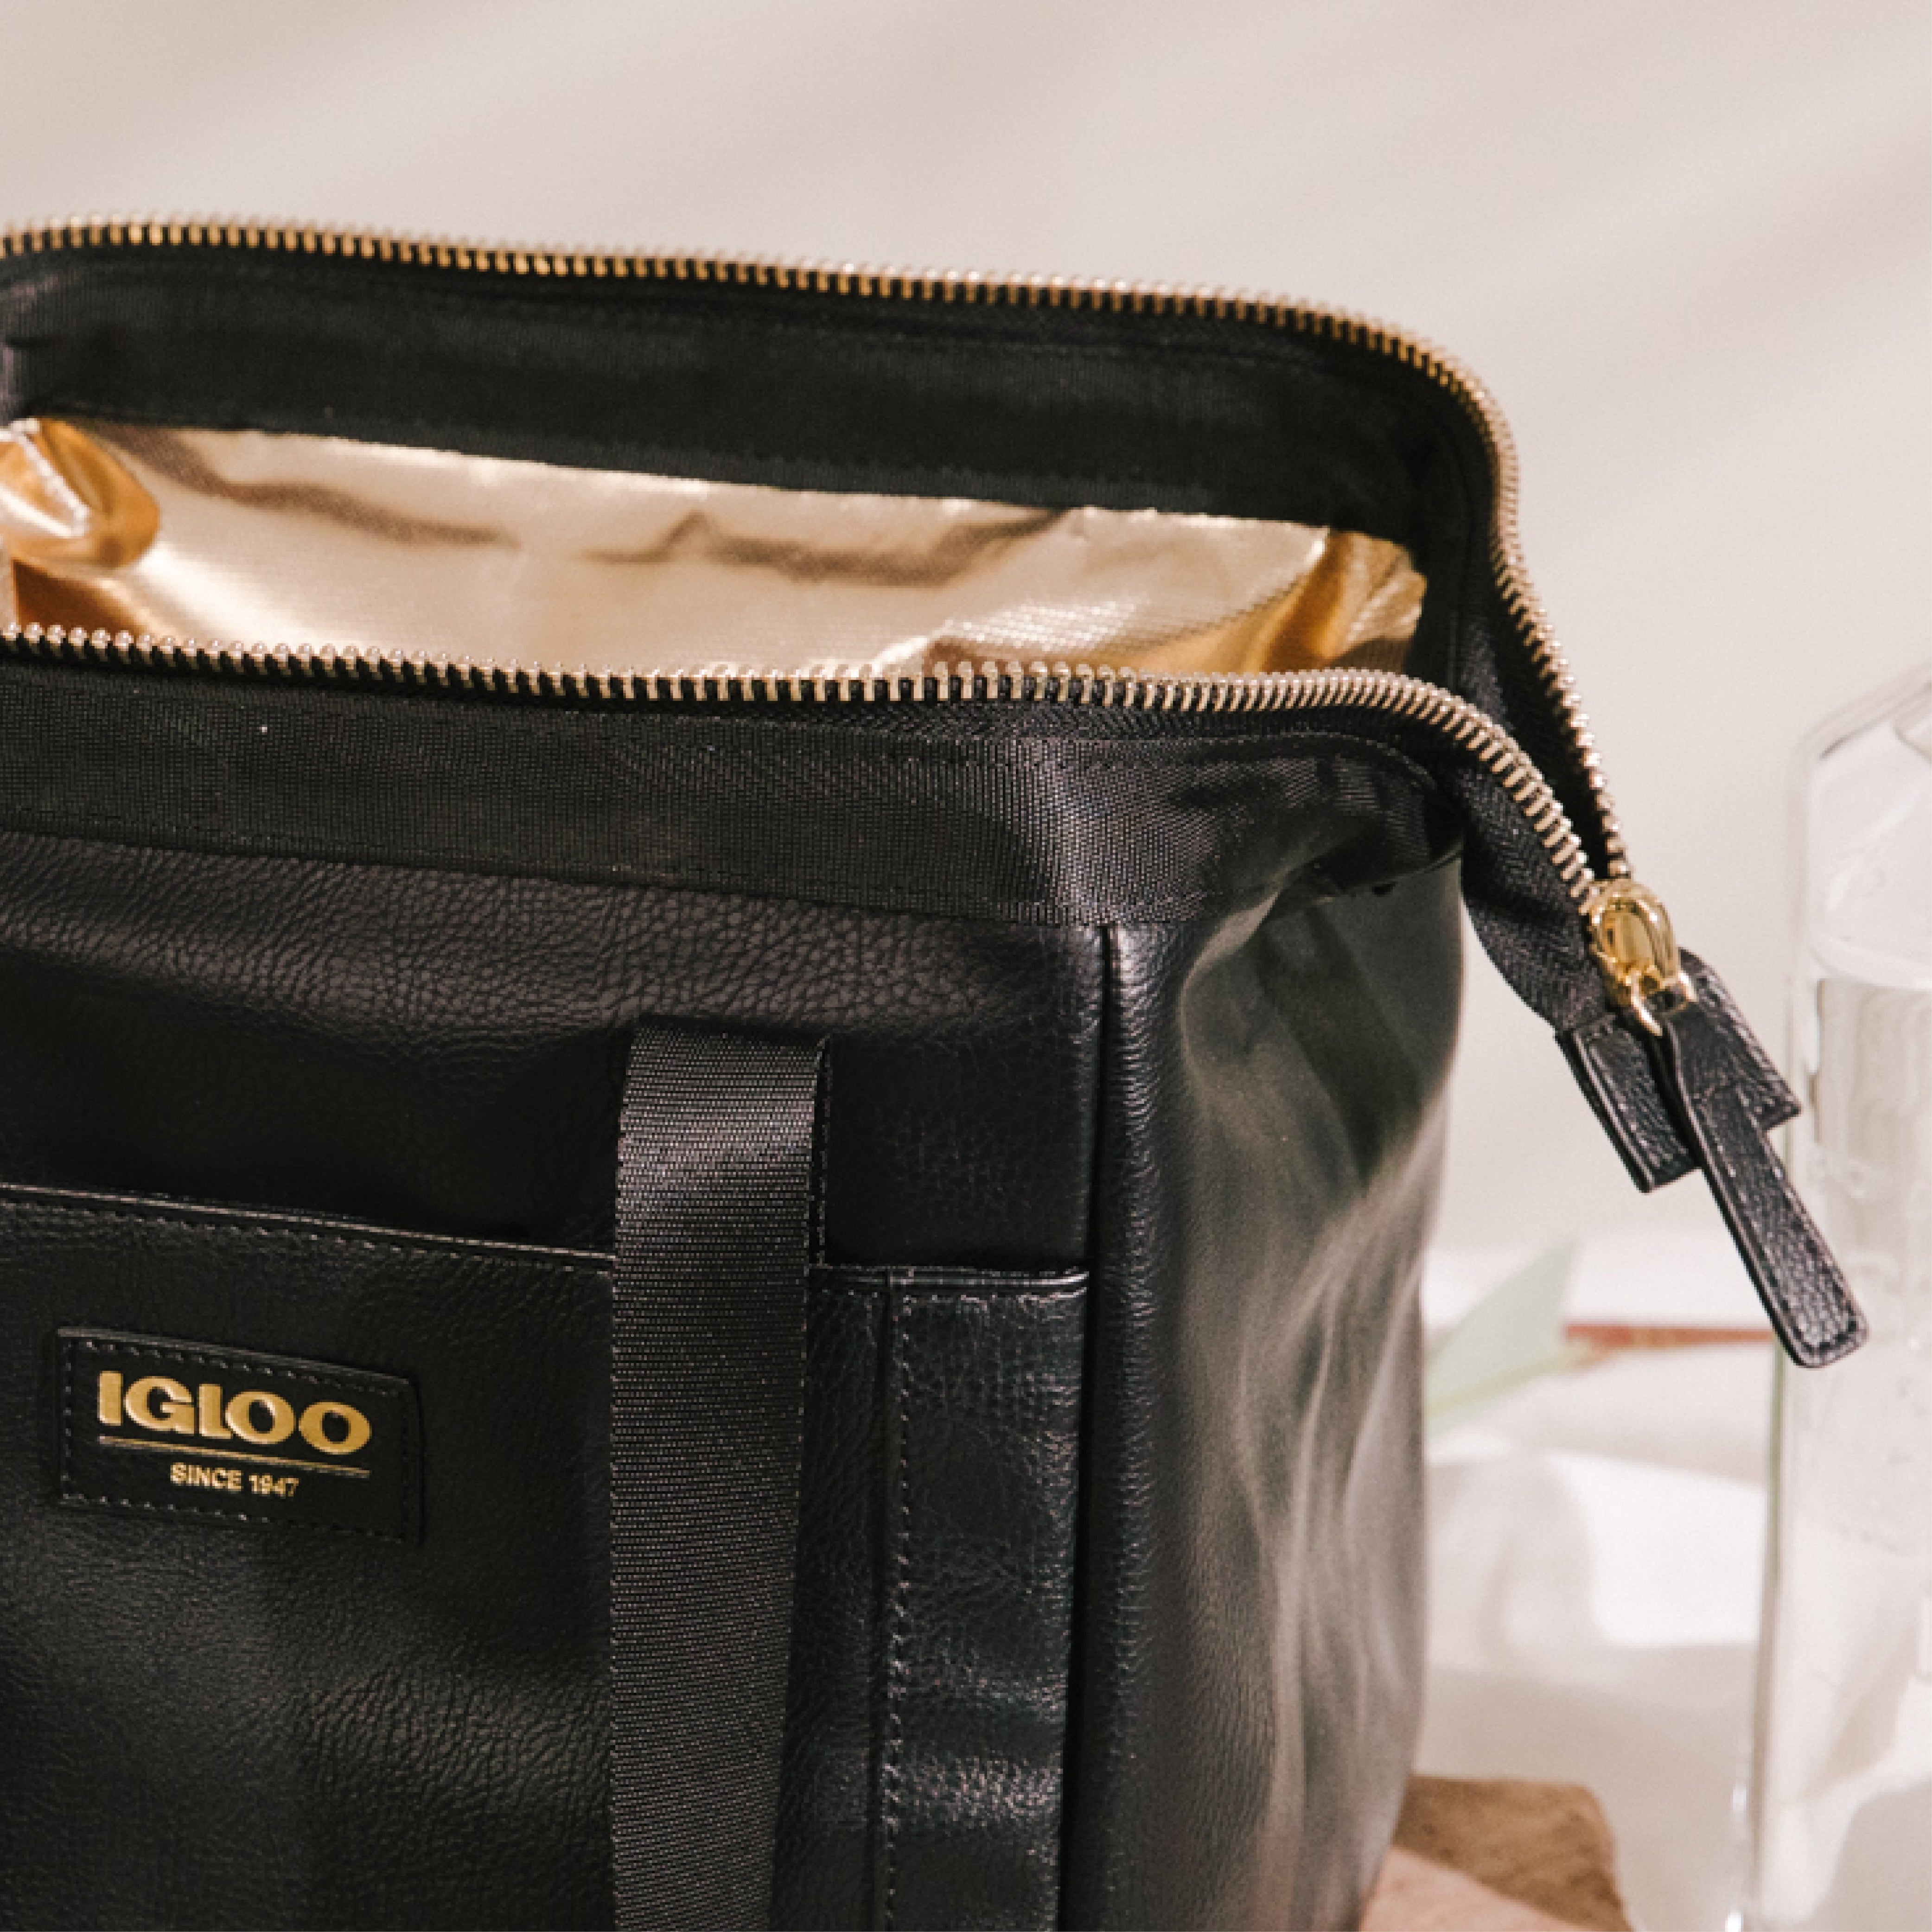 Igloo Luxe® Lunch Tote Cooler Bag